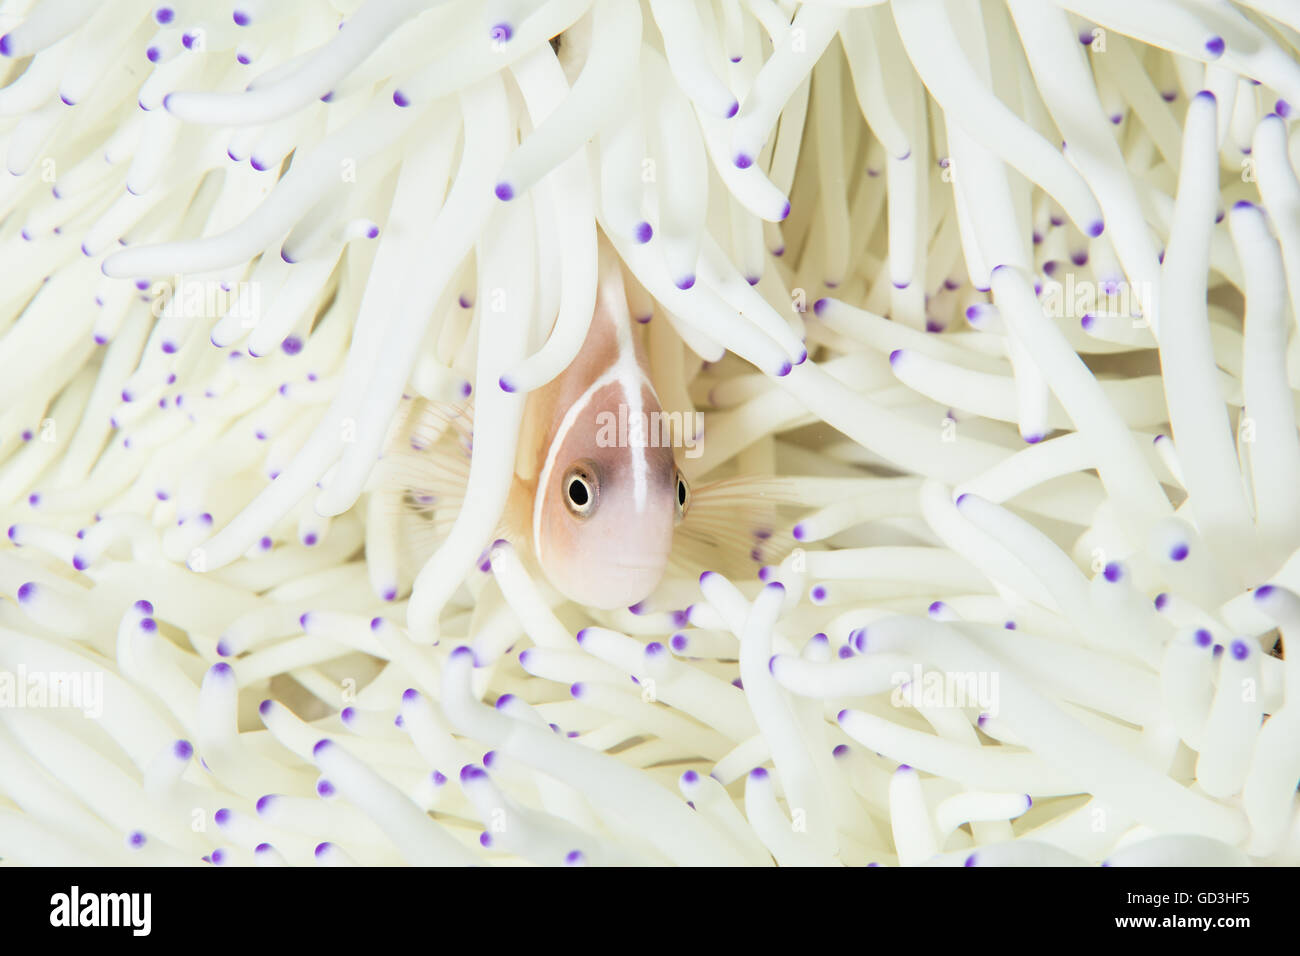 A Pink anemonefish (Amphiprion perideraion) swims among the tentacles of its host anemone on a coral reef in Indonesia. Stock Photo